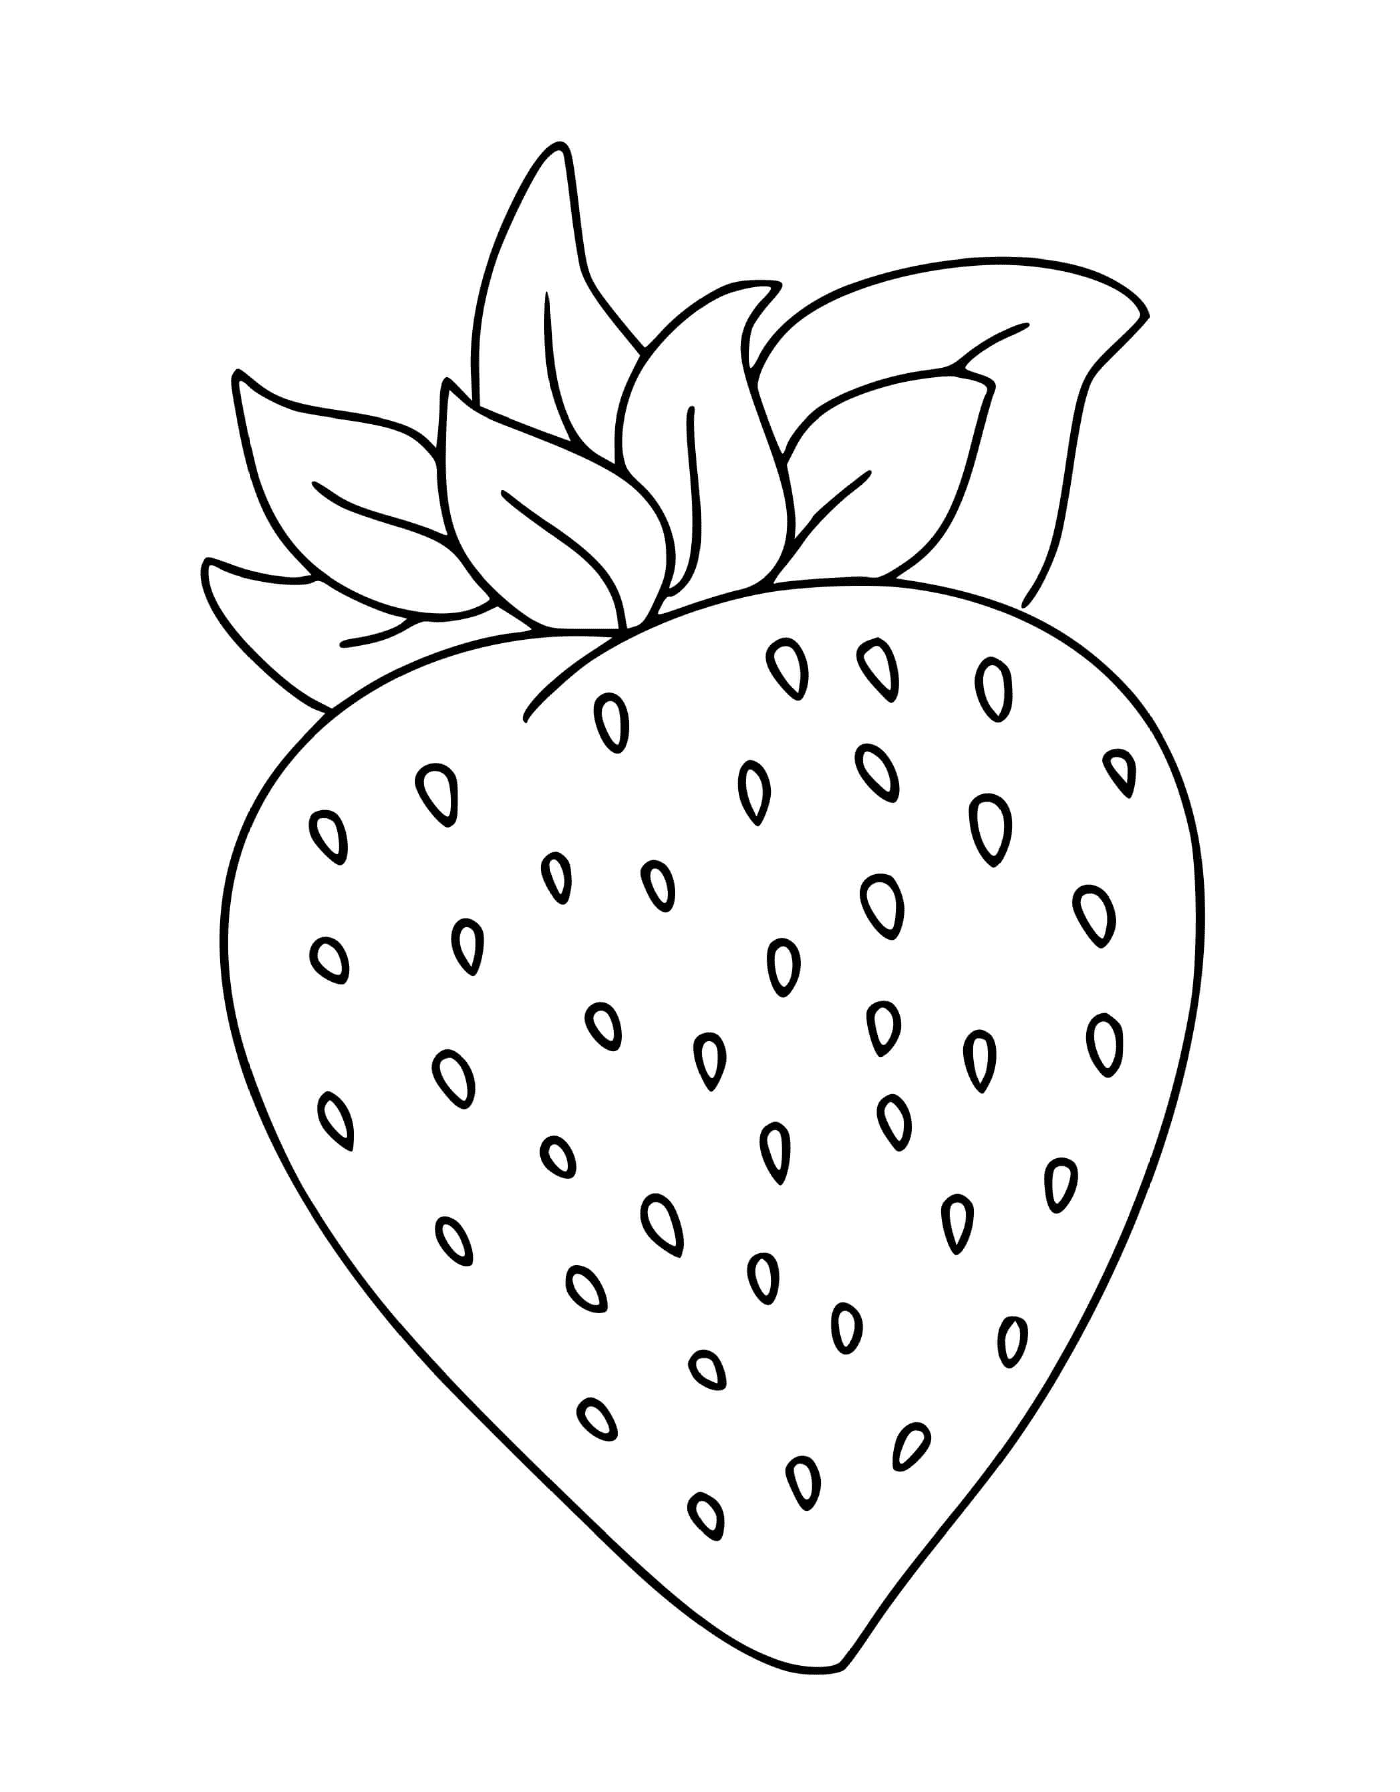  A juicy and delicious strawberry 